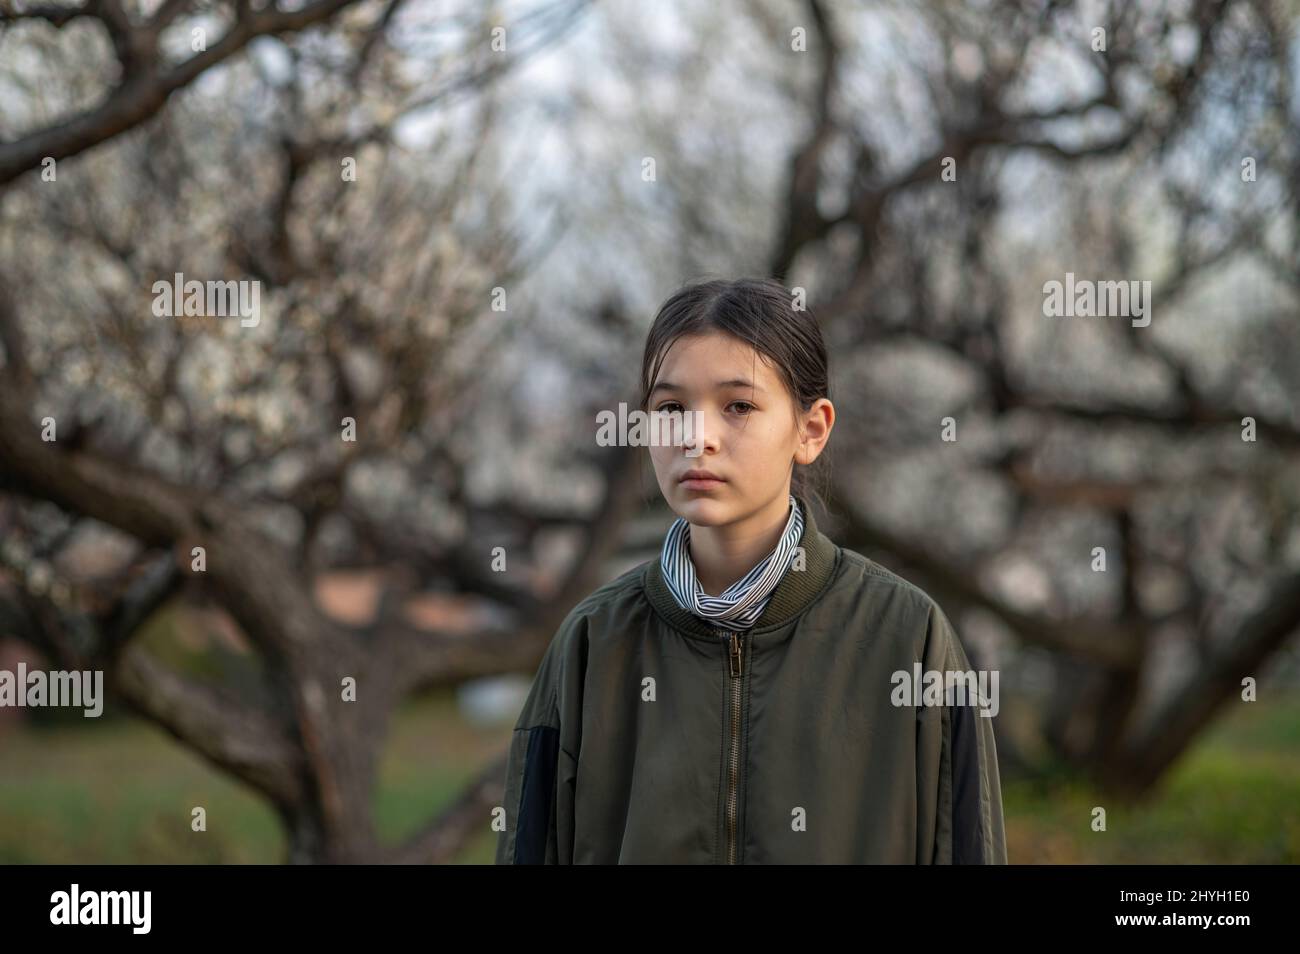 Portrait of a sad and sick pre teen girl in a park. Child wearing a green jacket and turtleneck. Blooming trees in the background. Springtime. Stock Photo